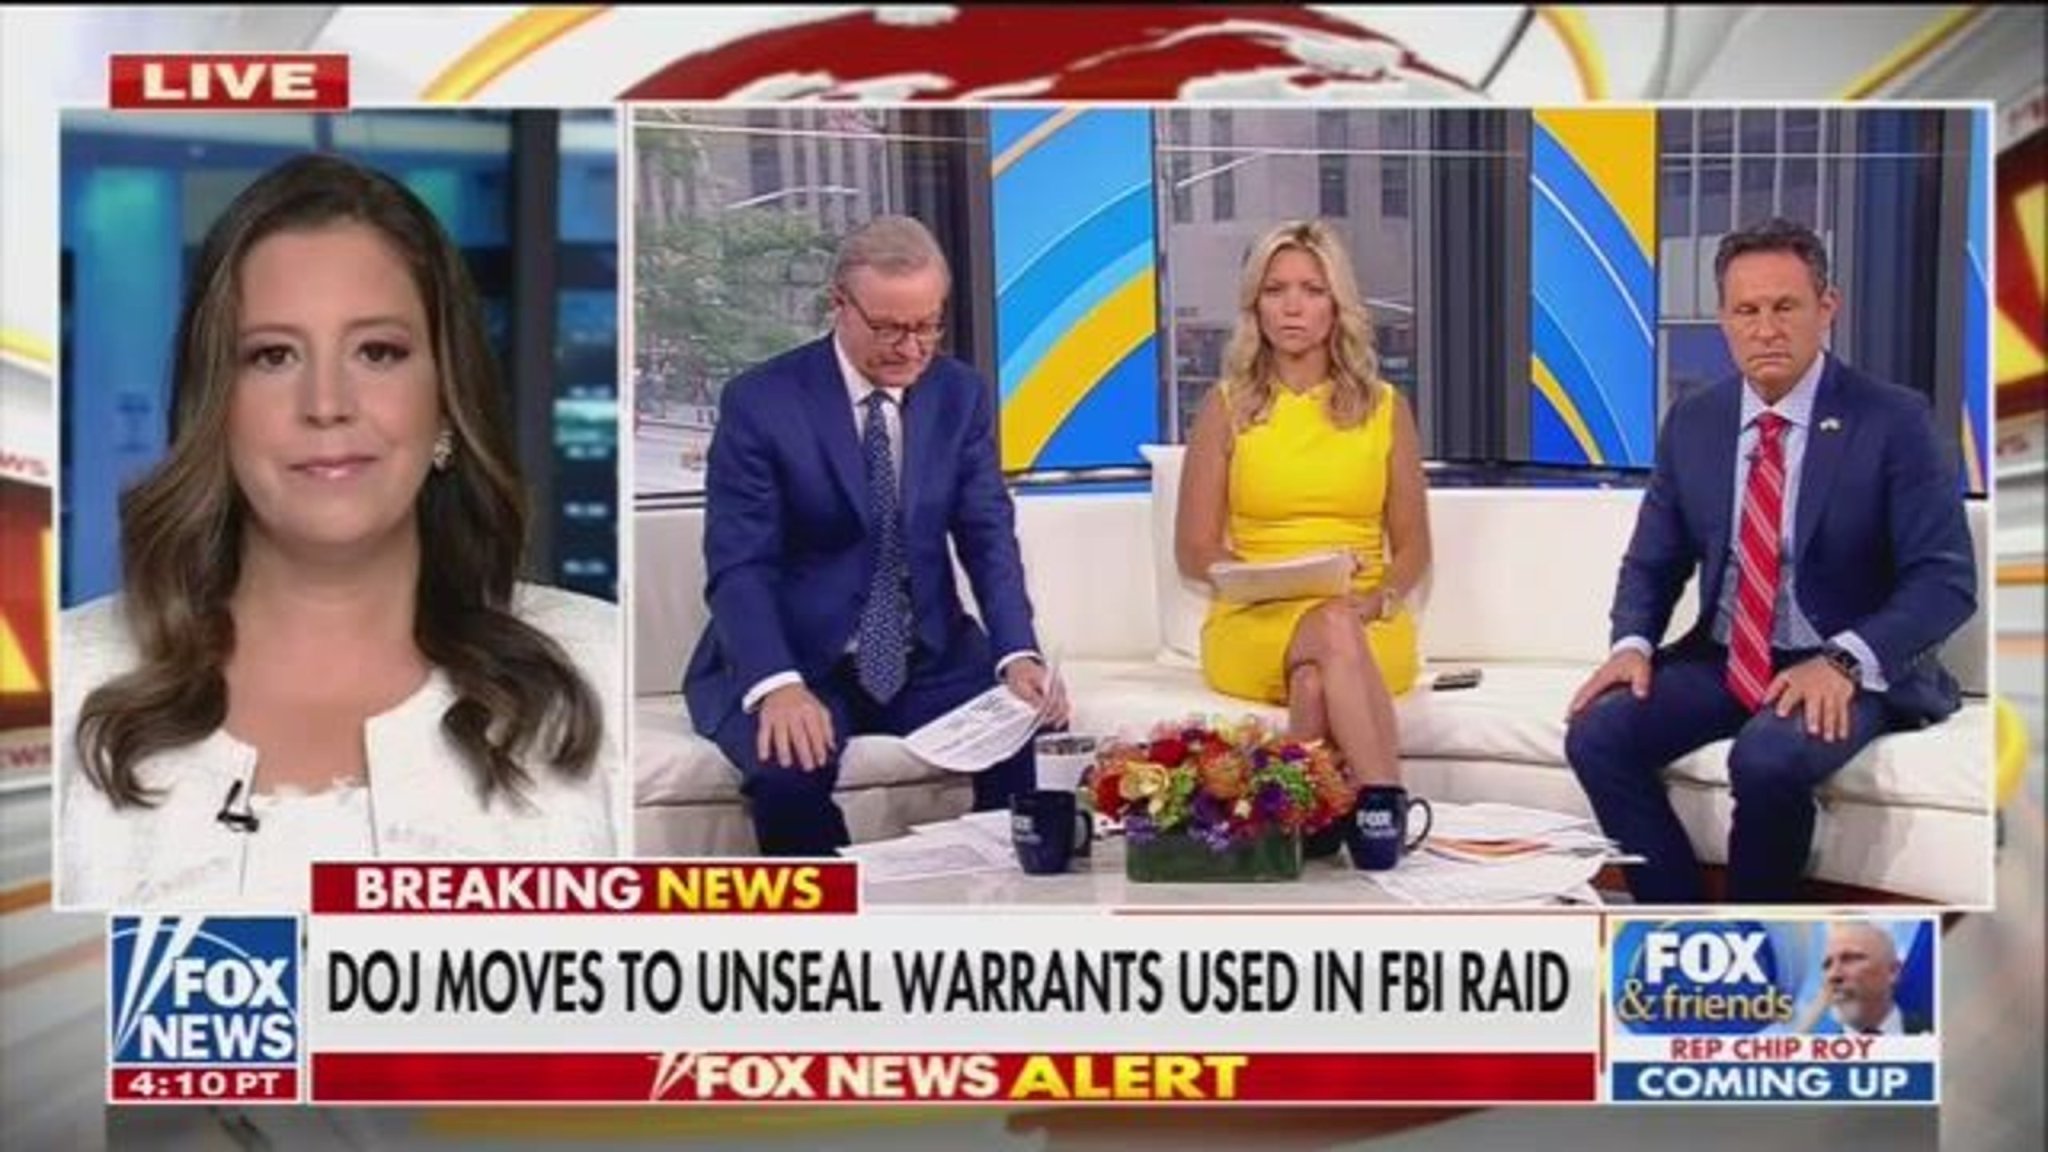 Fox News' Steve Doocy to House GOP Chair Stefanik on nuclear documents reporting: "That's kind of a big deal!"